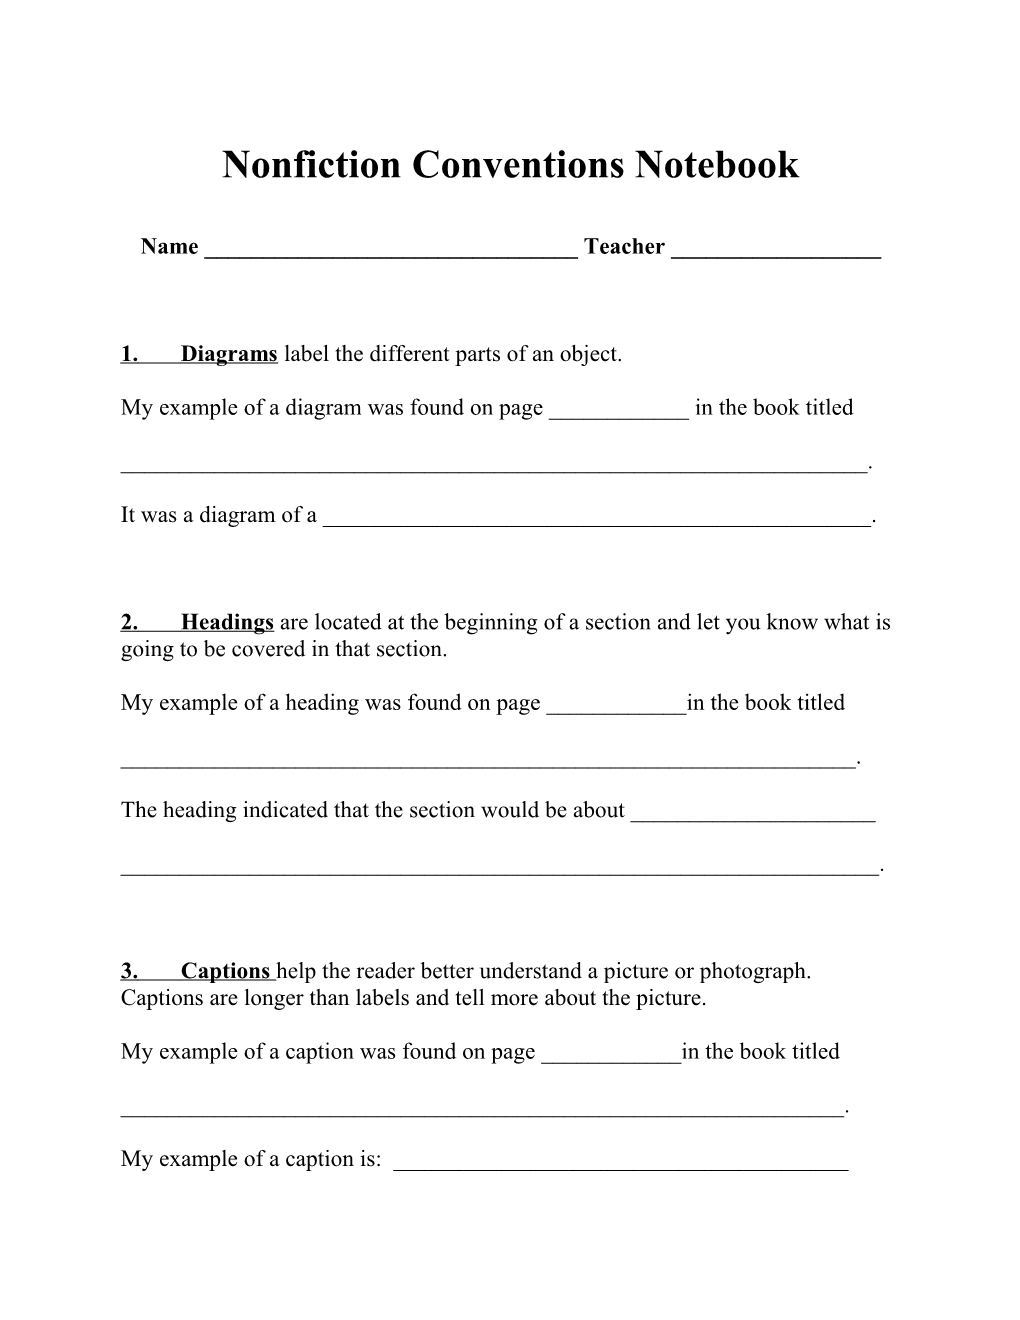 Nonfiction Conventions Notebook